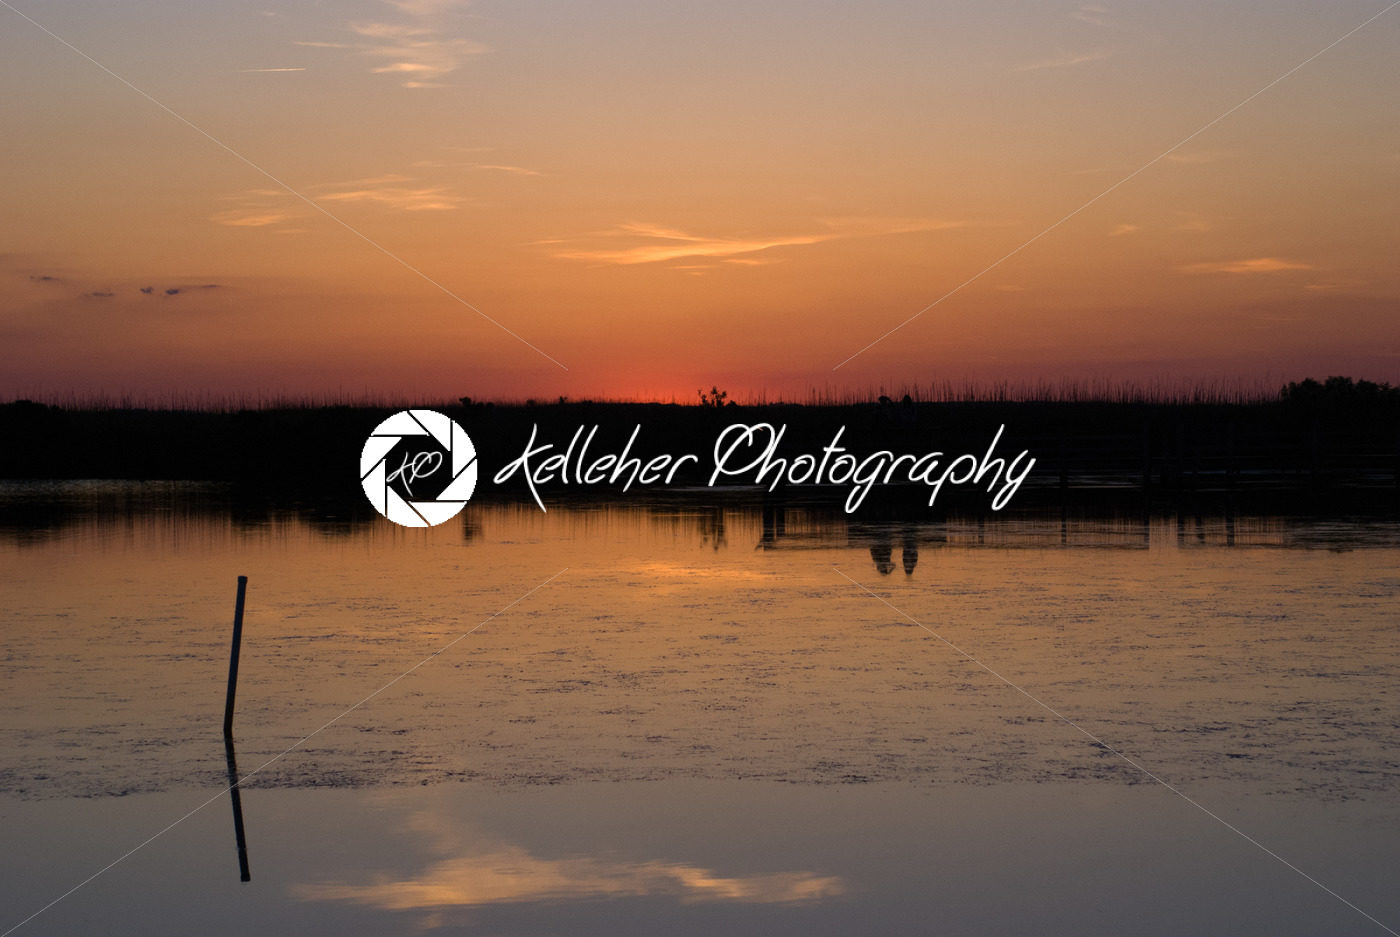 Sunset near Currituck Lighthouse in Outer Banks North Carolina - Kelleher Photography Store